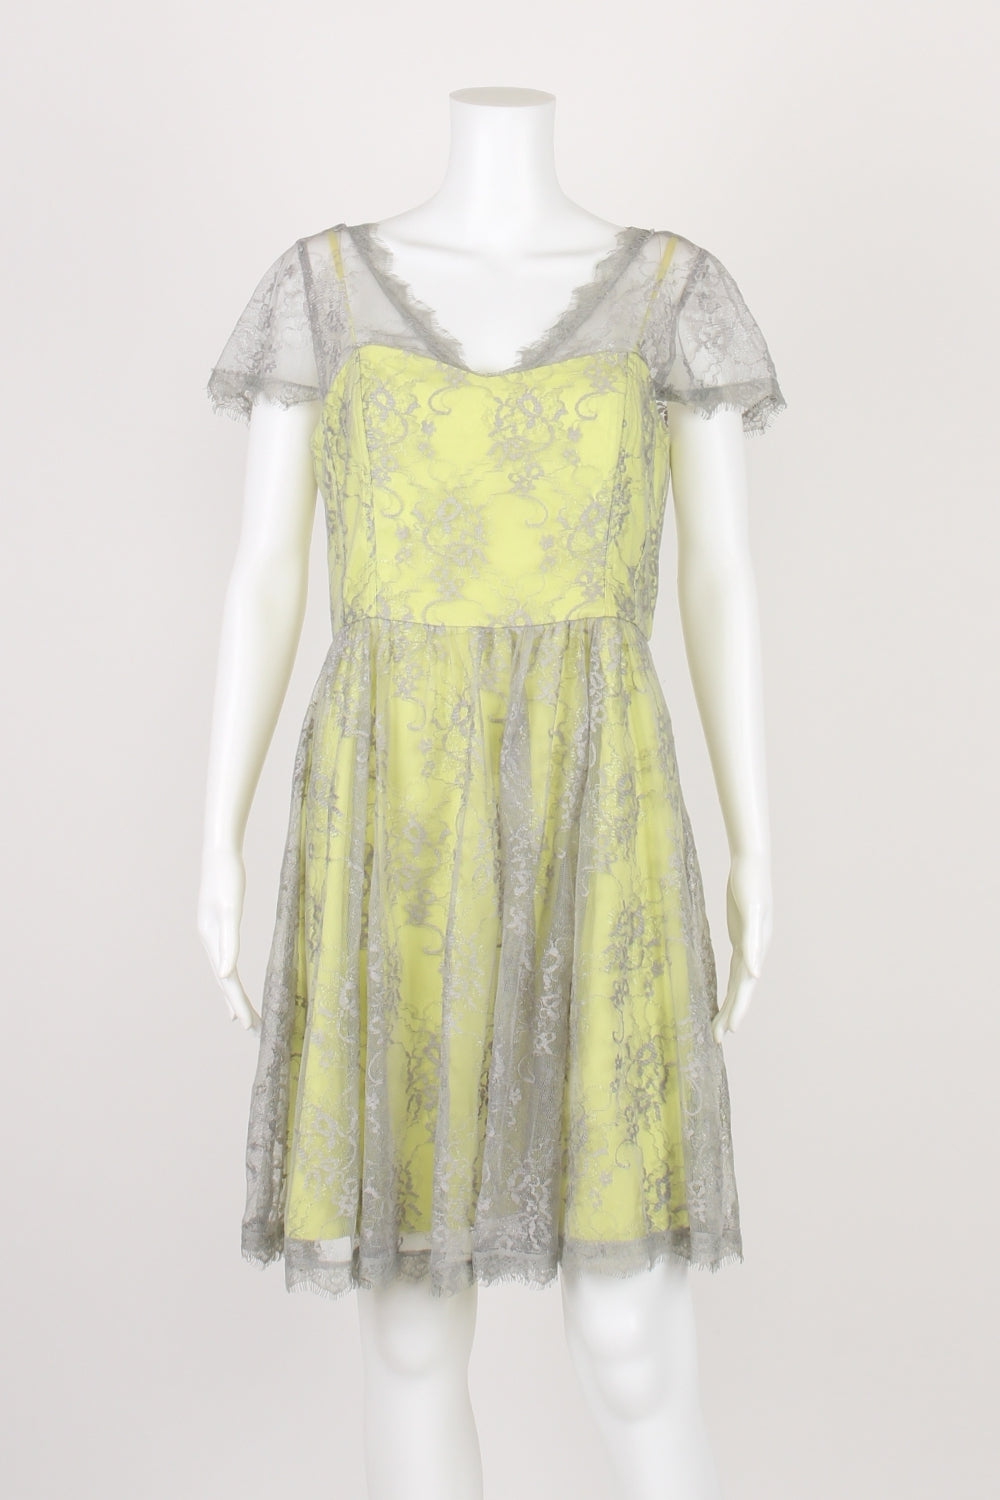 Portmans Green and Silver Lace Dress 12